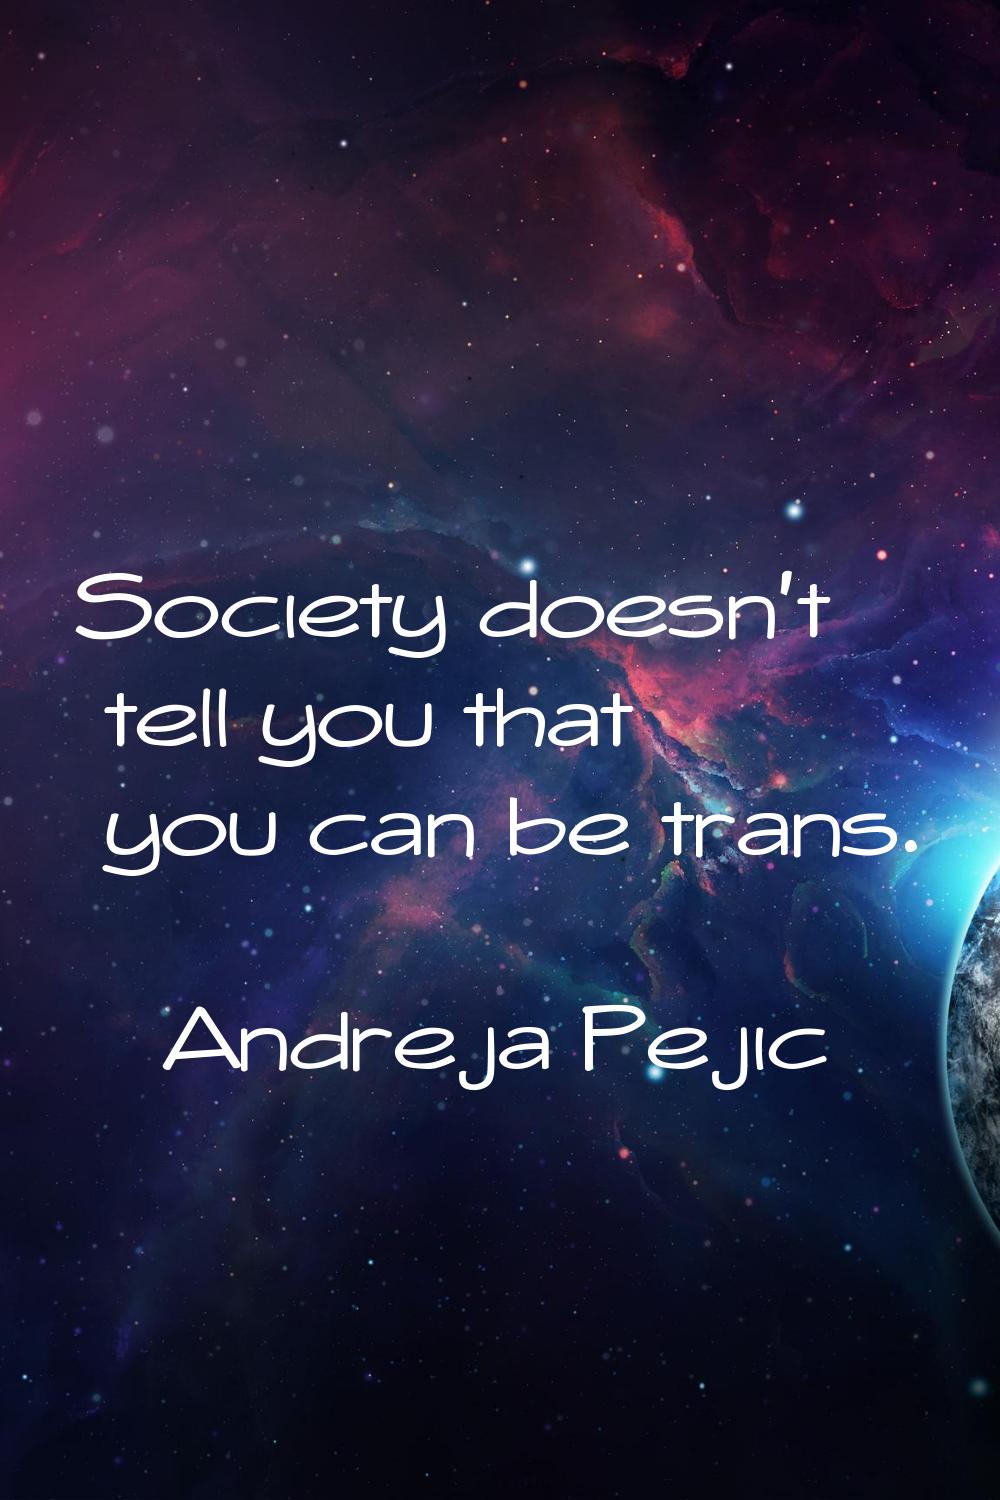 Society doesn't tell you that you can be trans.